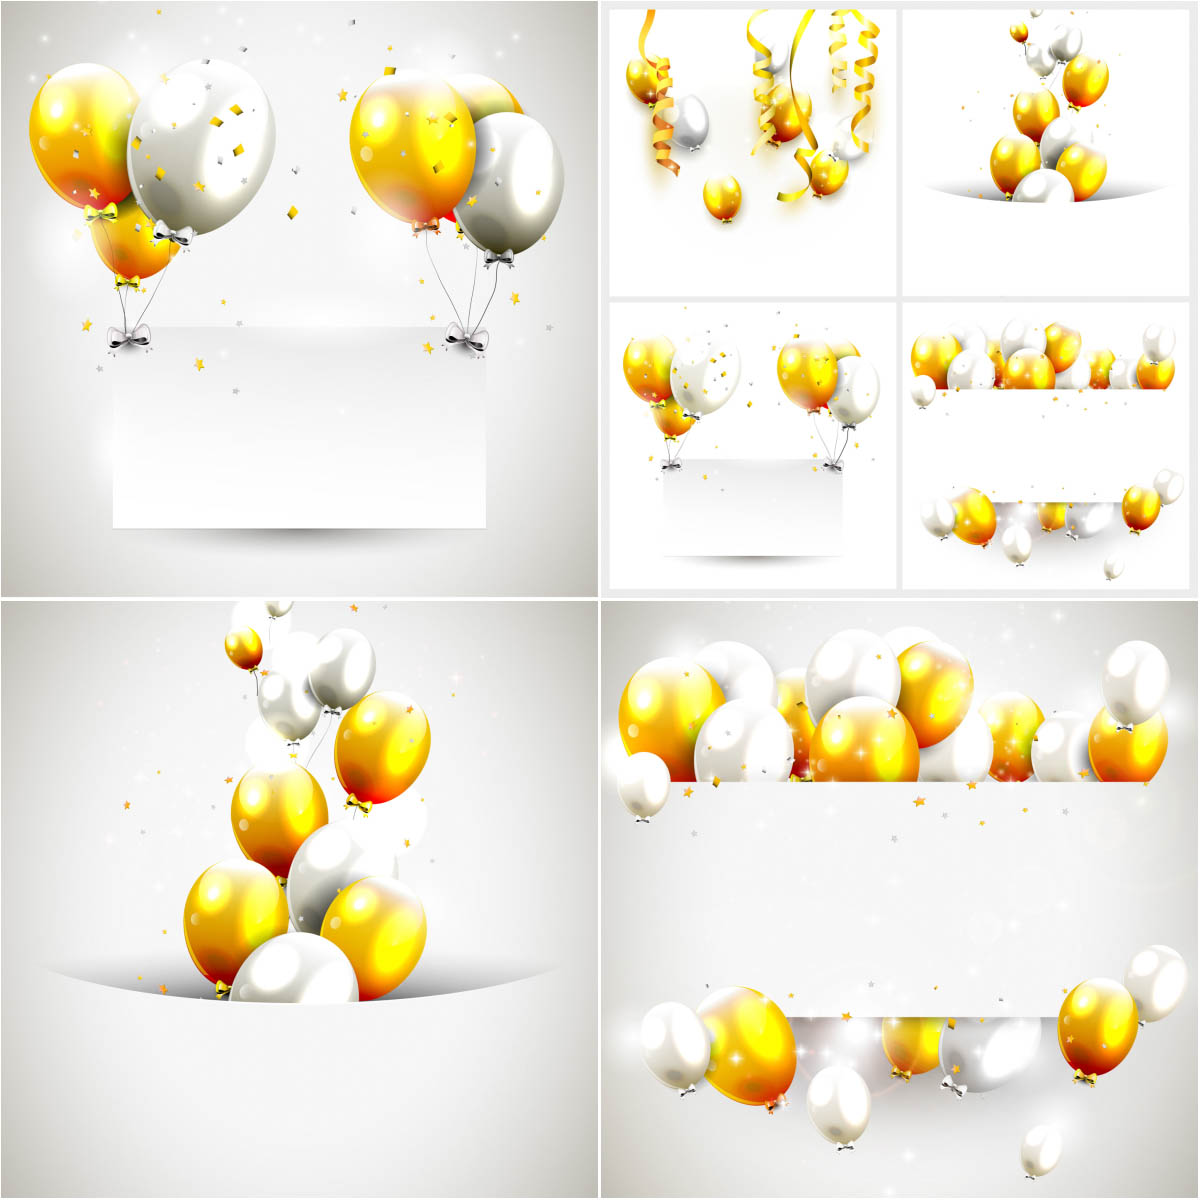 Backgrounds with colorful balloons